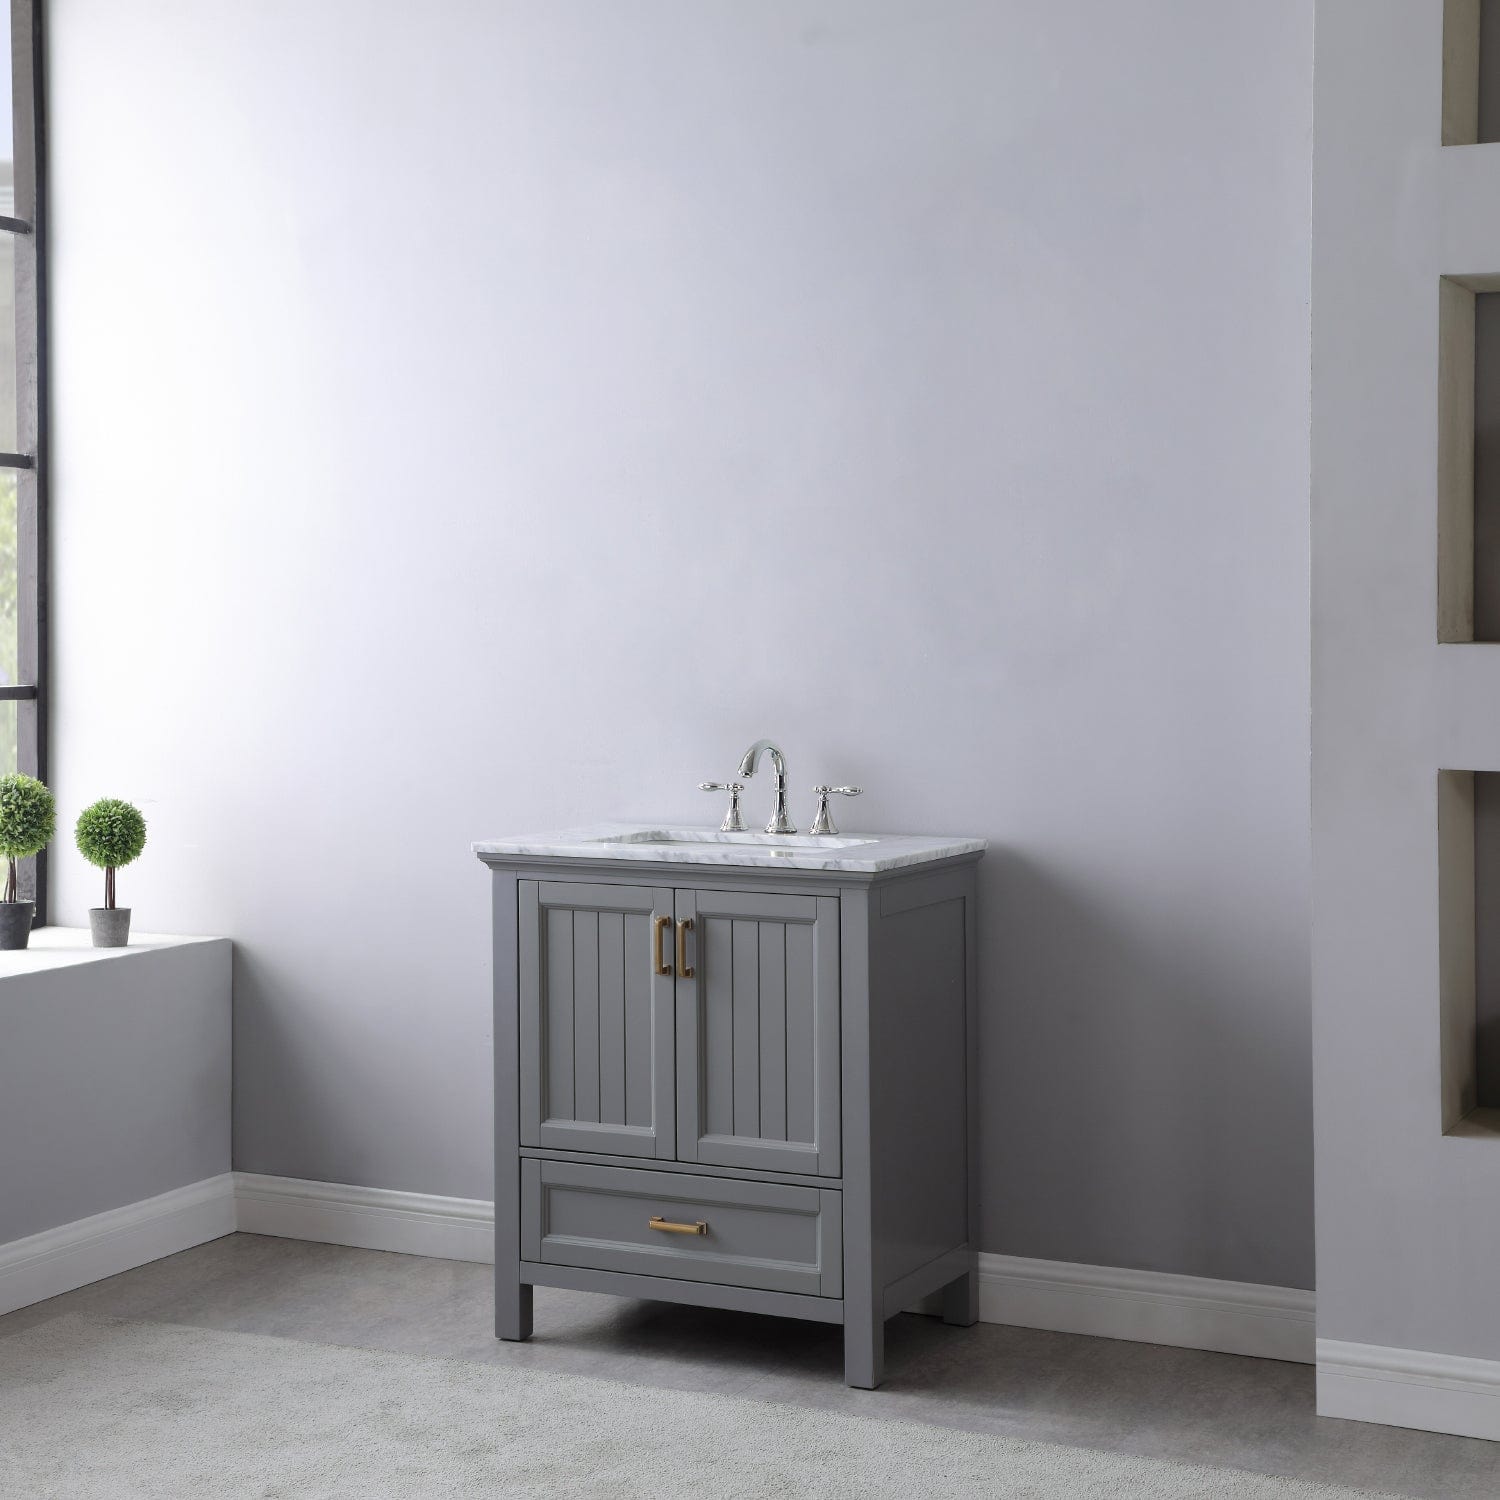 Altair Isla 30" Single Bathroom Vanity Set in Gray and Carrara White Marble Countertop without Mirror 538030-GR-CA-NM - Molaix631112970723Vanity538030-GR-CA-NM